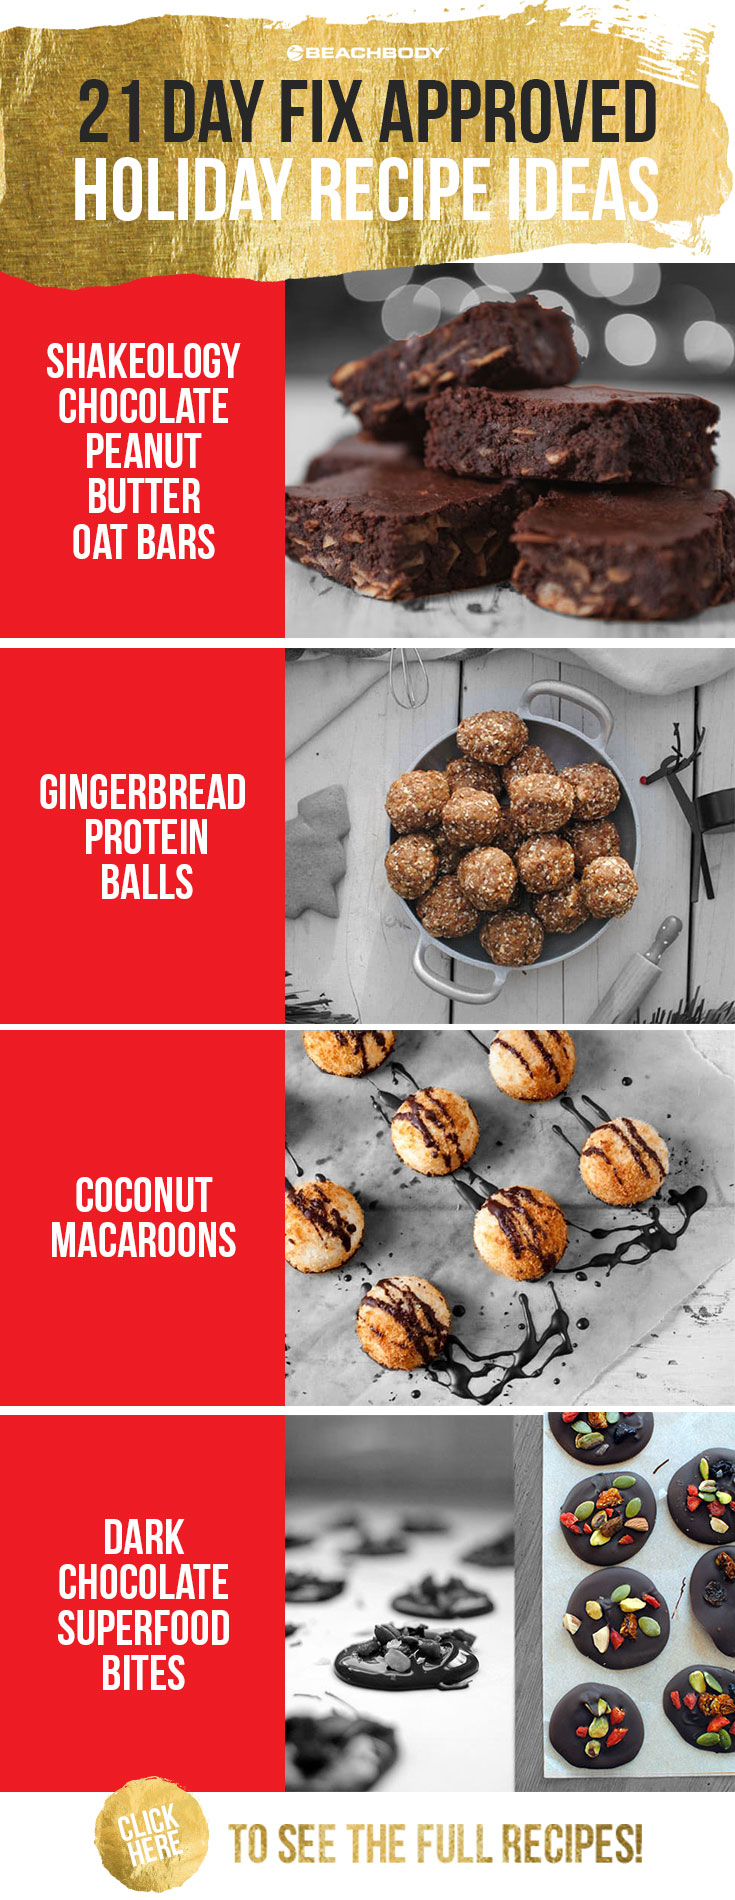 Eating healthy doesn’t mean you can’t treat yourself. Try these 21 Day Fix treats recipes for any Holiday occasion on your list.